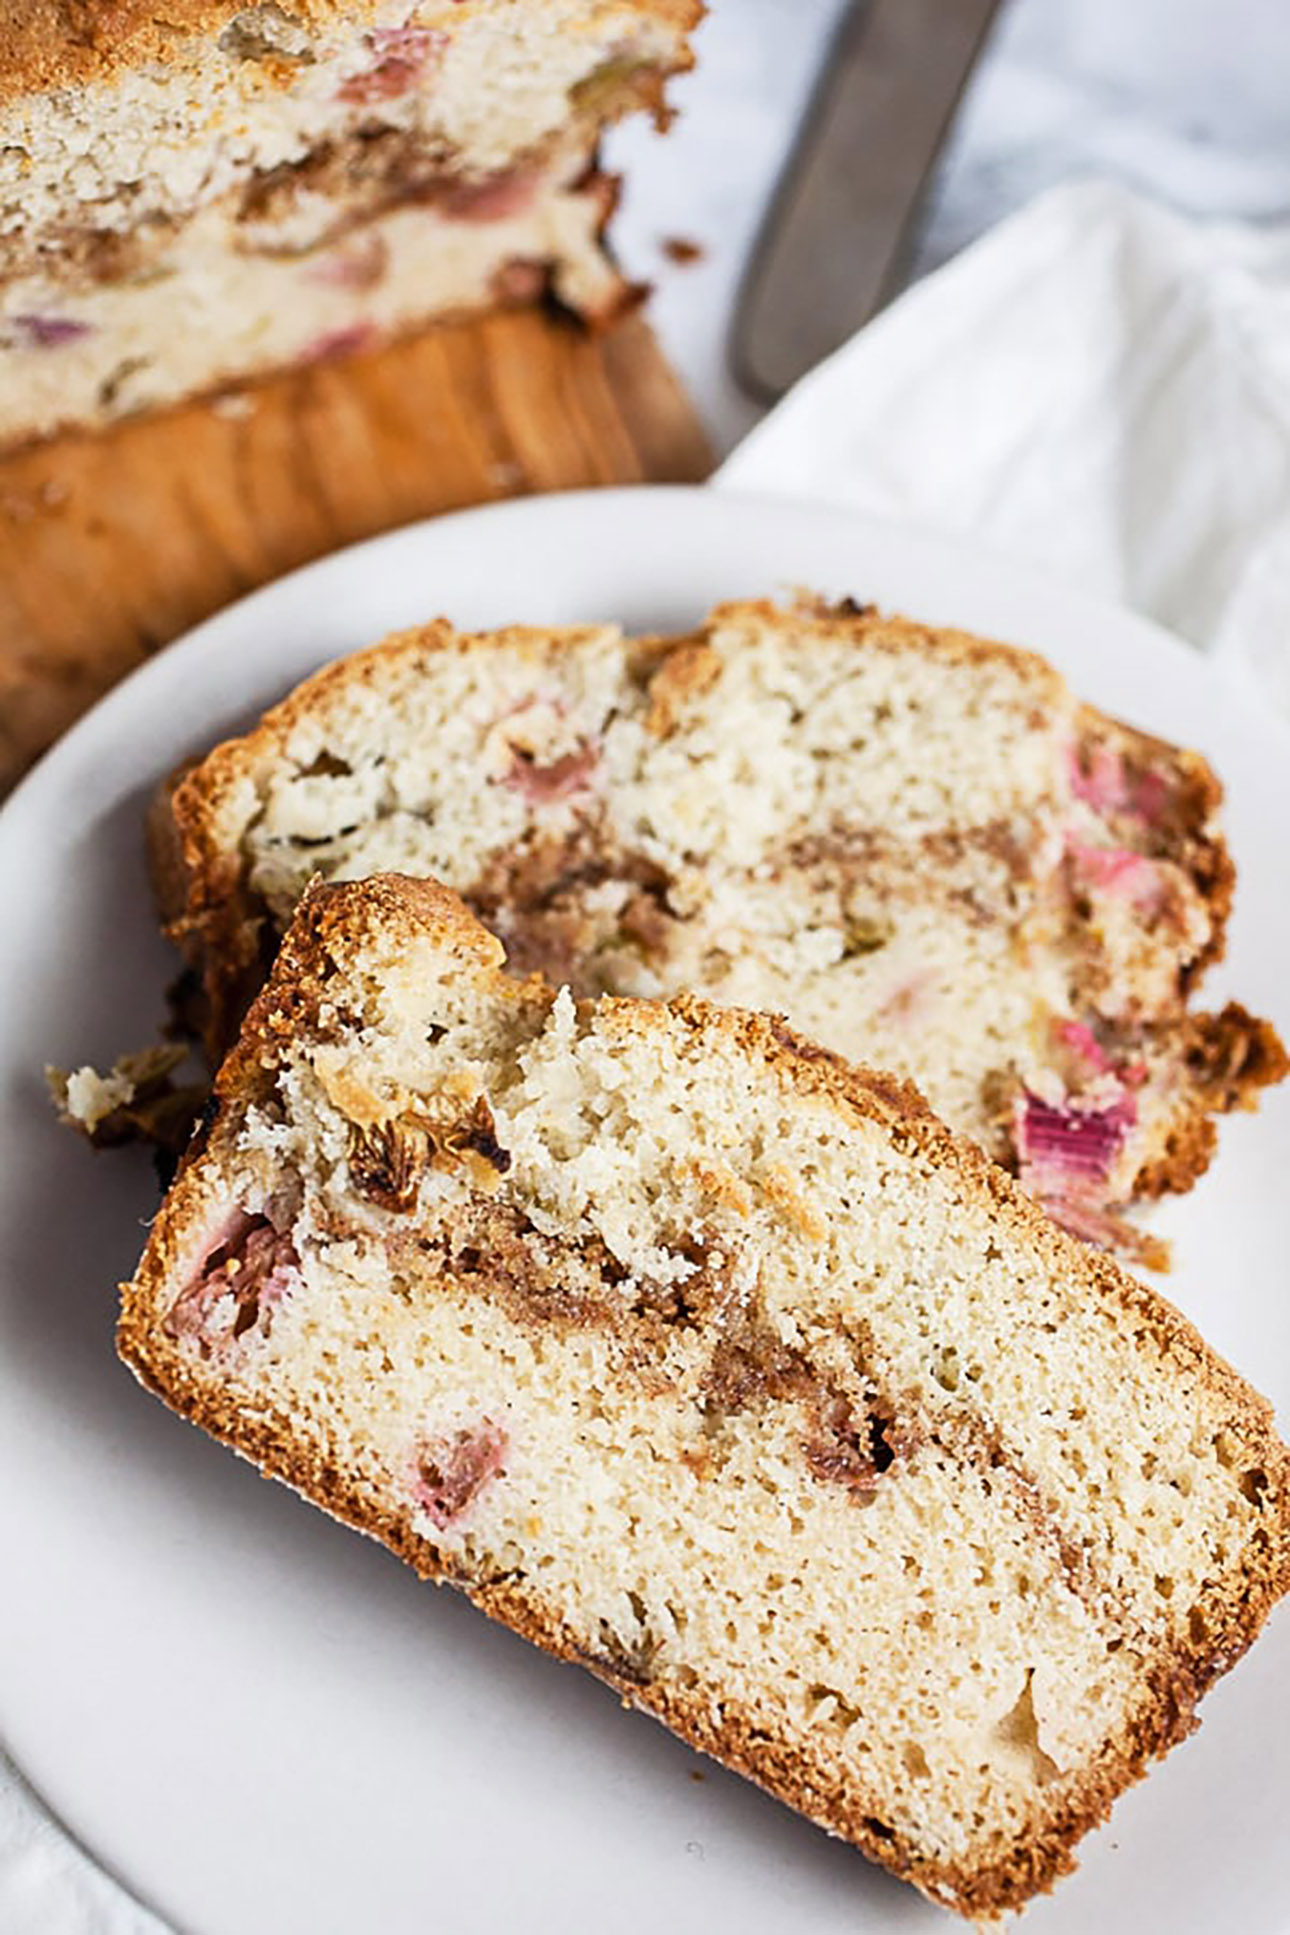 Old Fashioned Rhubarb Bread by The Rustic Foodie // 15 Rhubarb Dessert Recipes for Spring